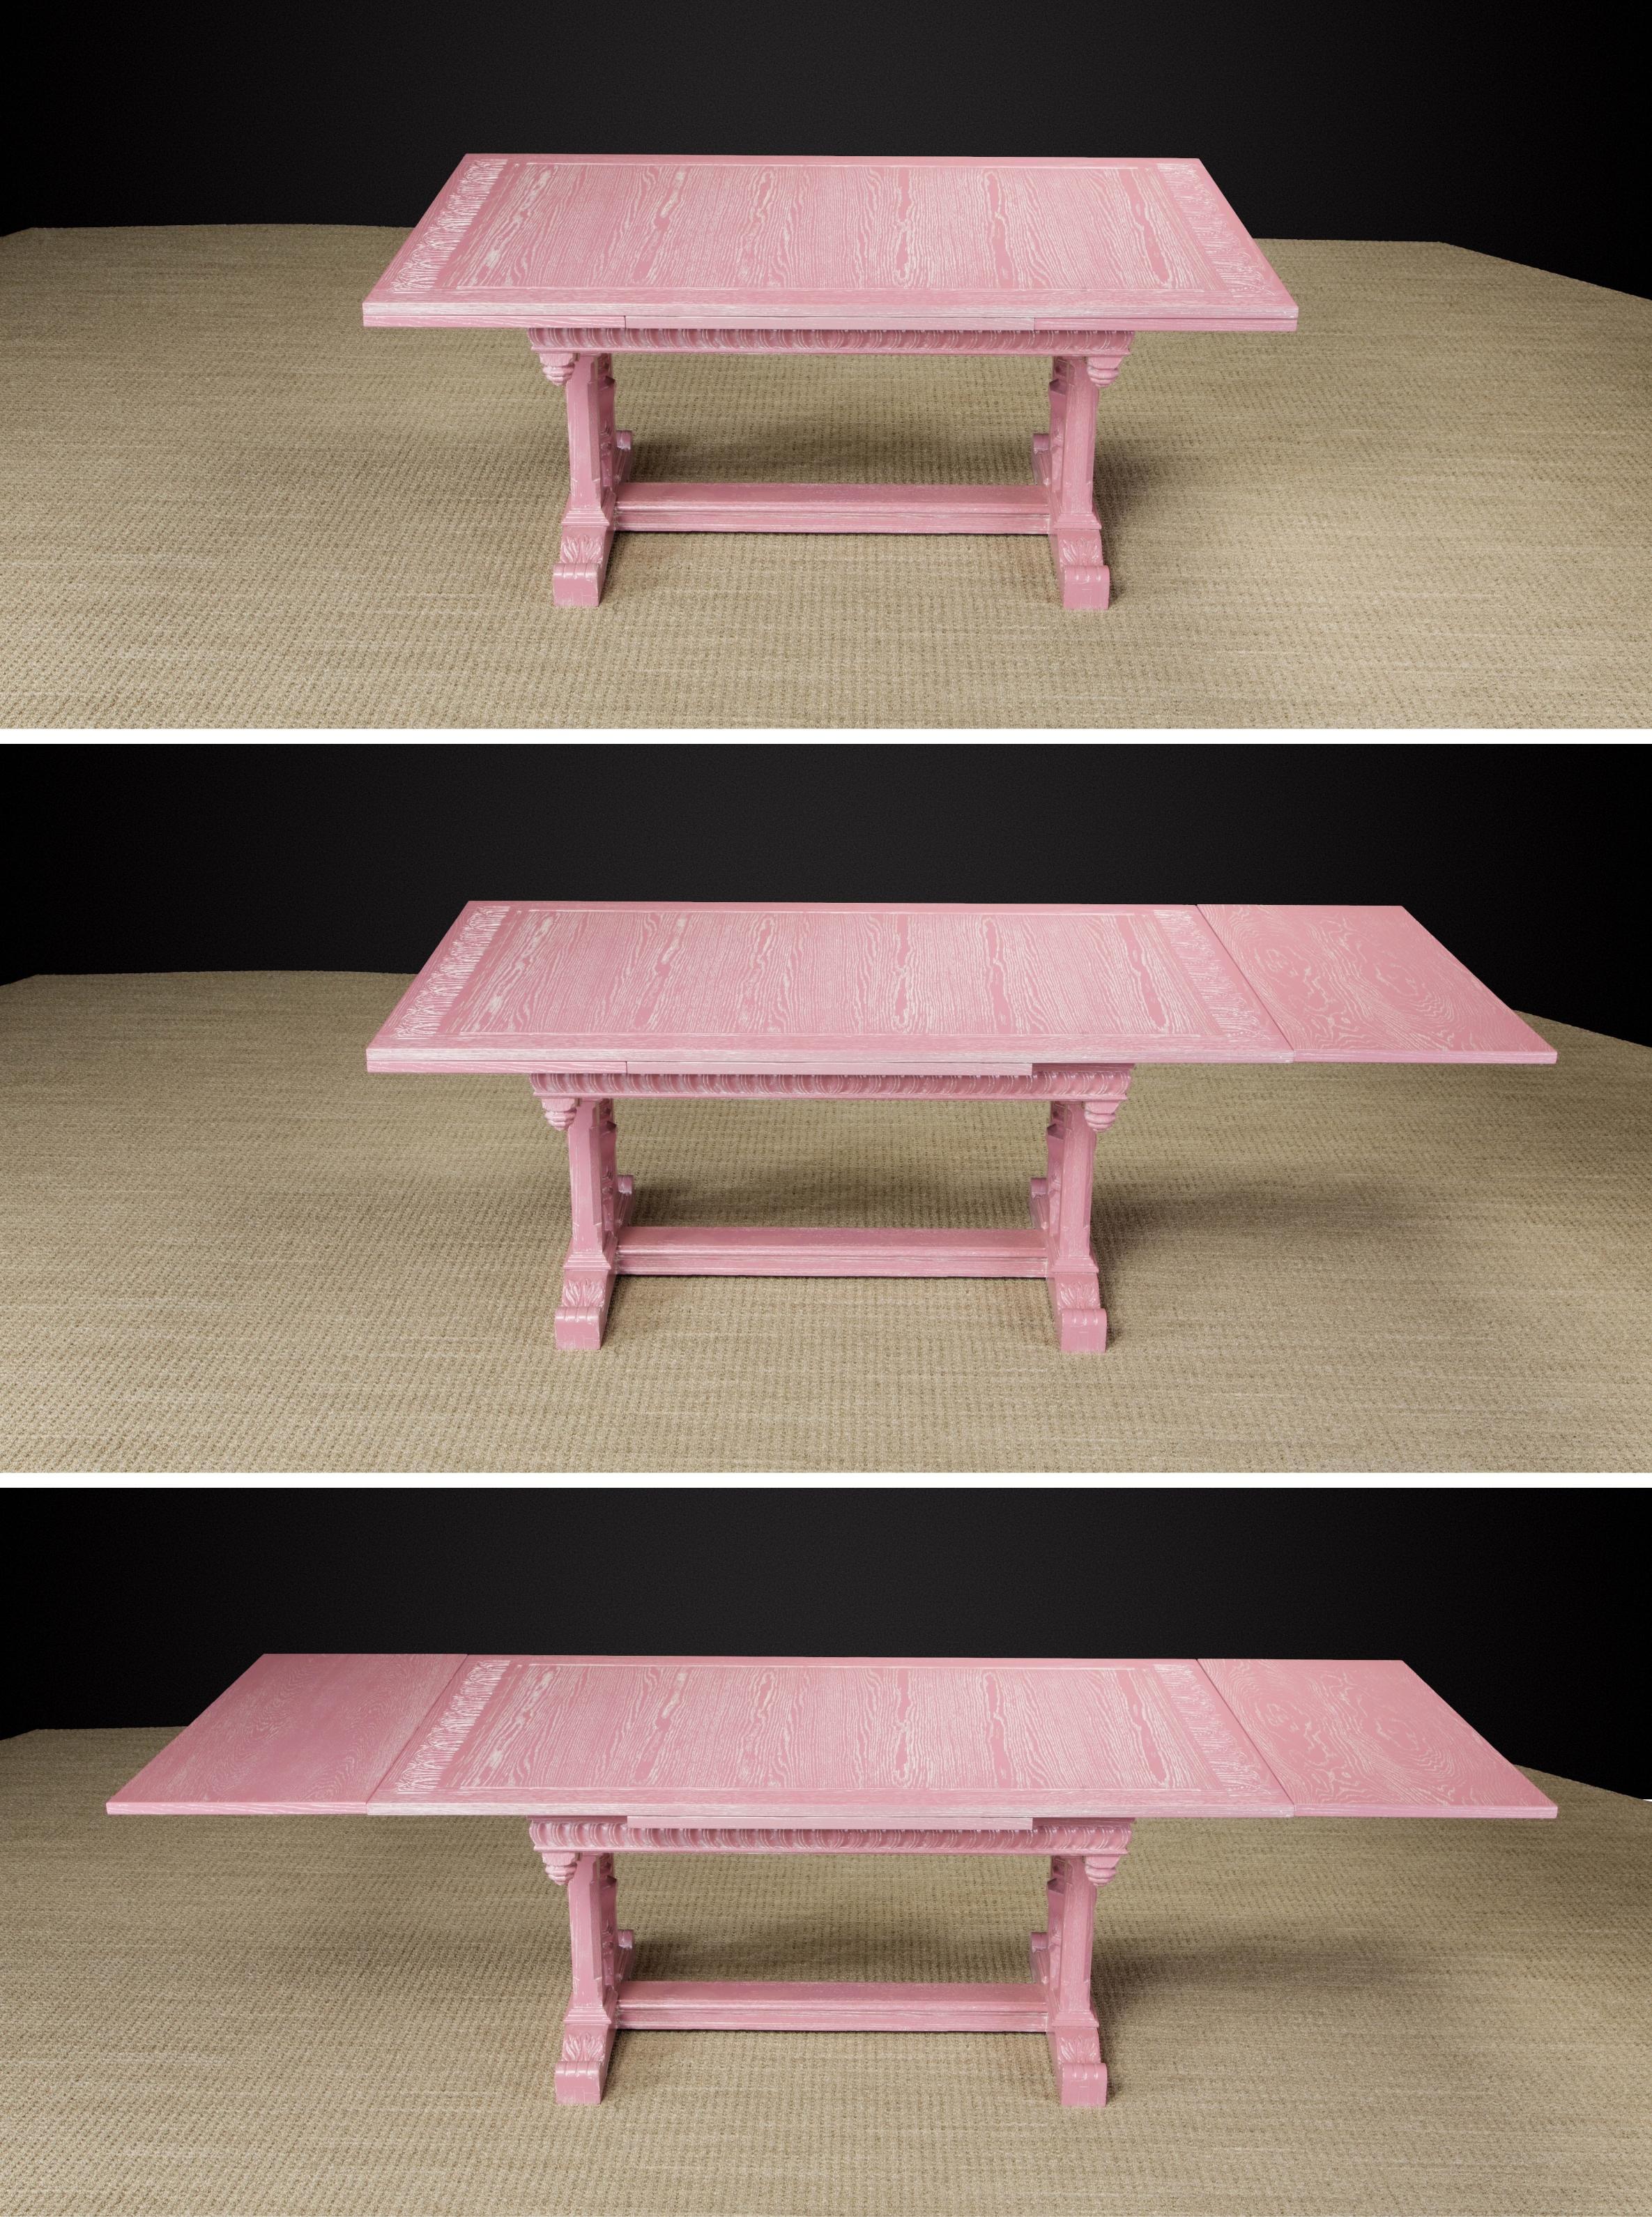 20th Century Jacobean Revival Carved Oak Dining Set Restored in Cerused Pink, circa 1930s